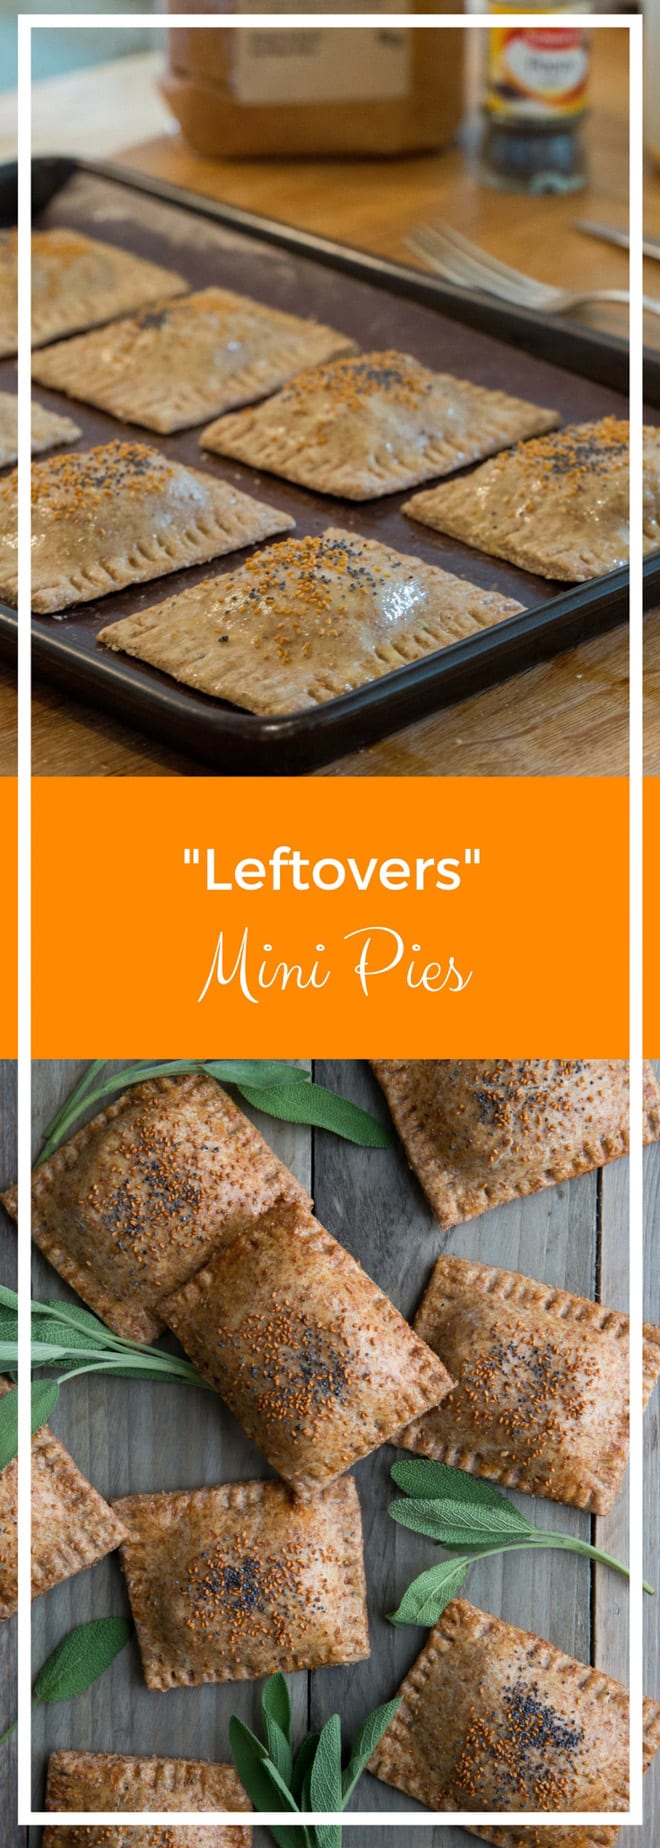 Leftovers Mini Pies - use your leftover stuffing to make these super tasty little hand pies for a quick post Christmas snack | thecookandhim.com